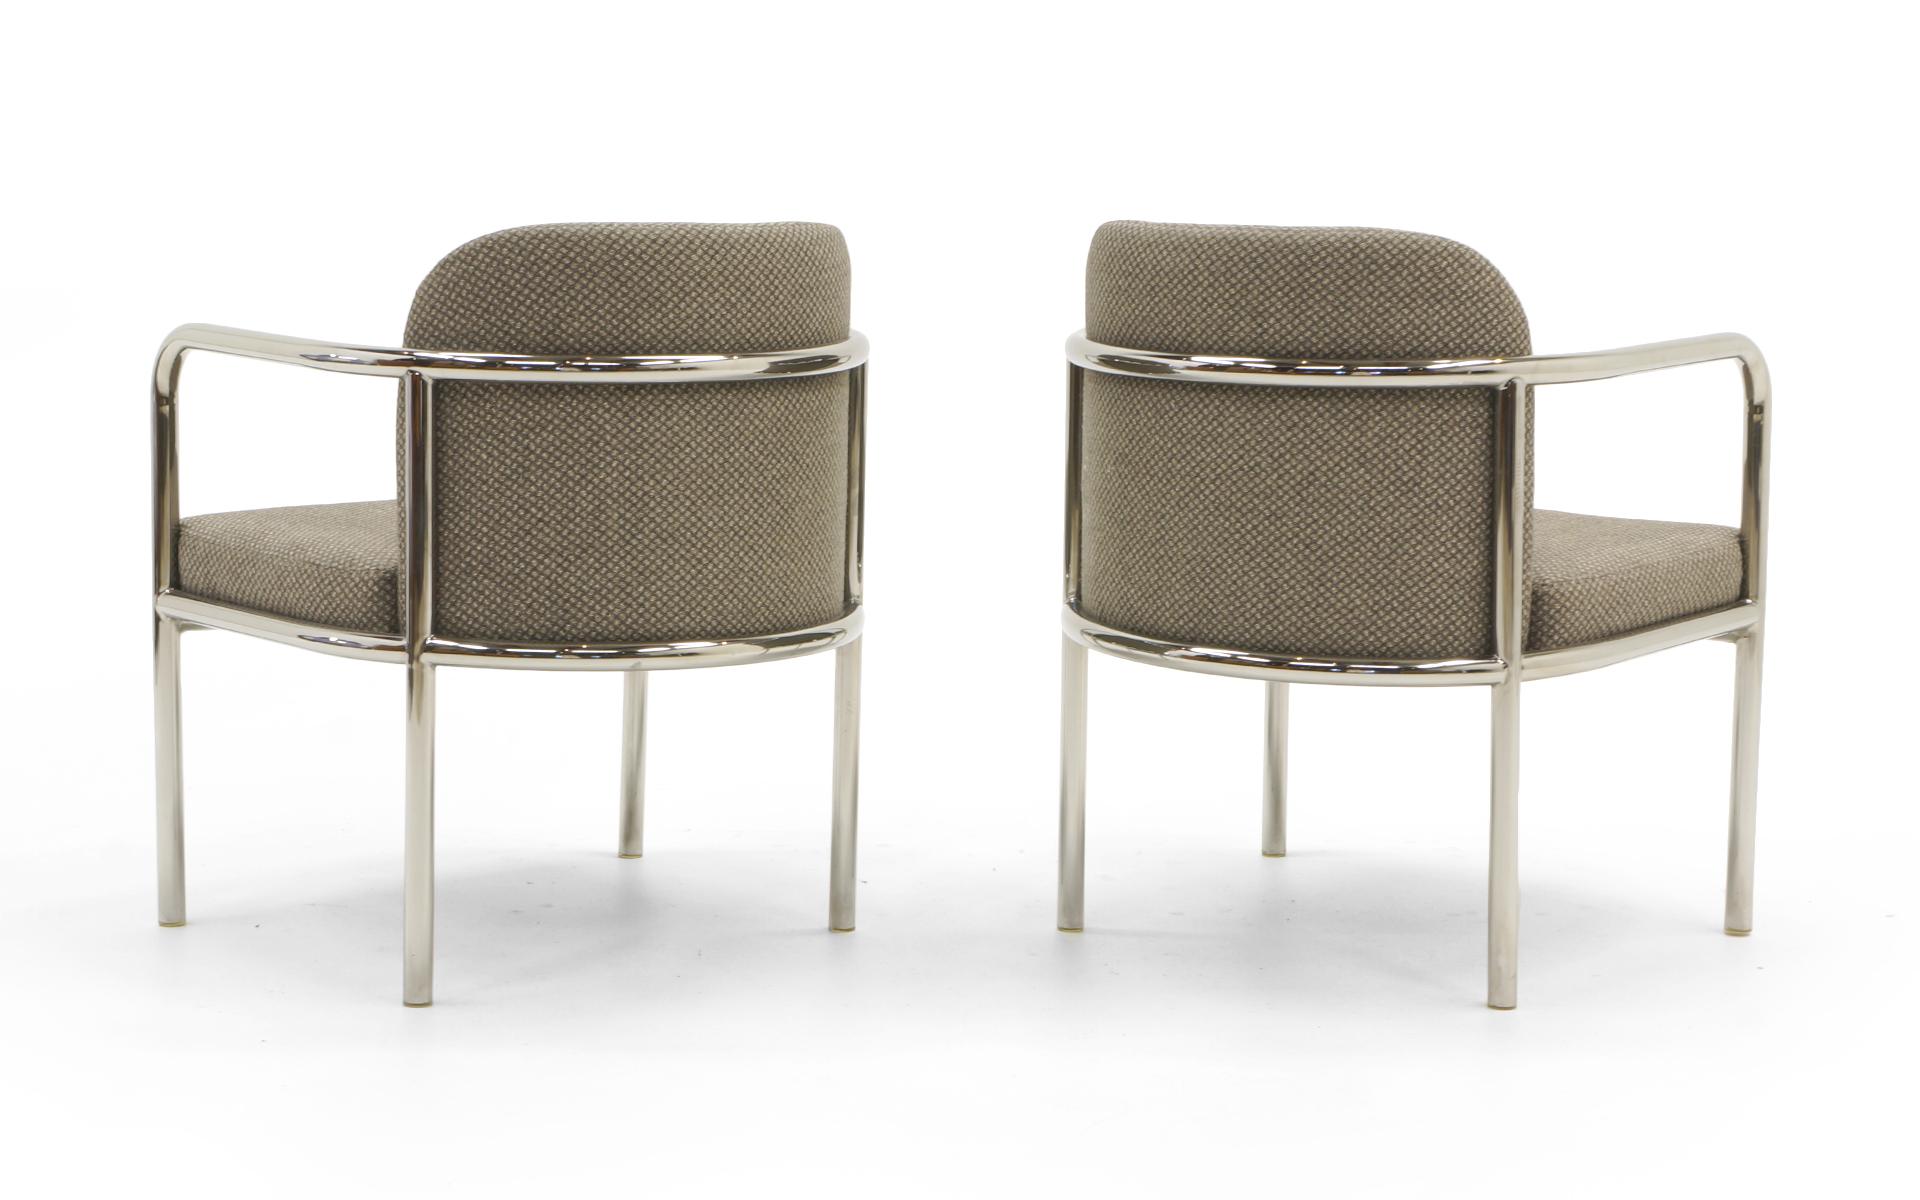 American Pair of Side Chairs in Milo Baughman Style, Rounded Tubular Chrome Frames